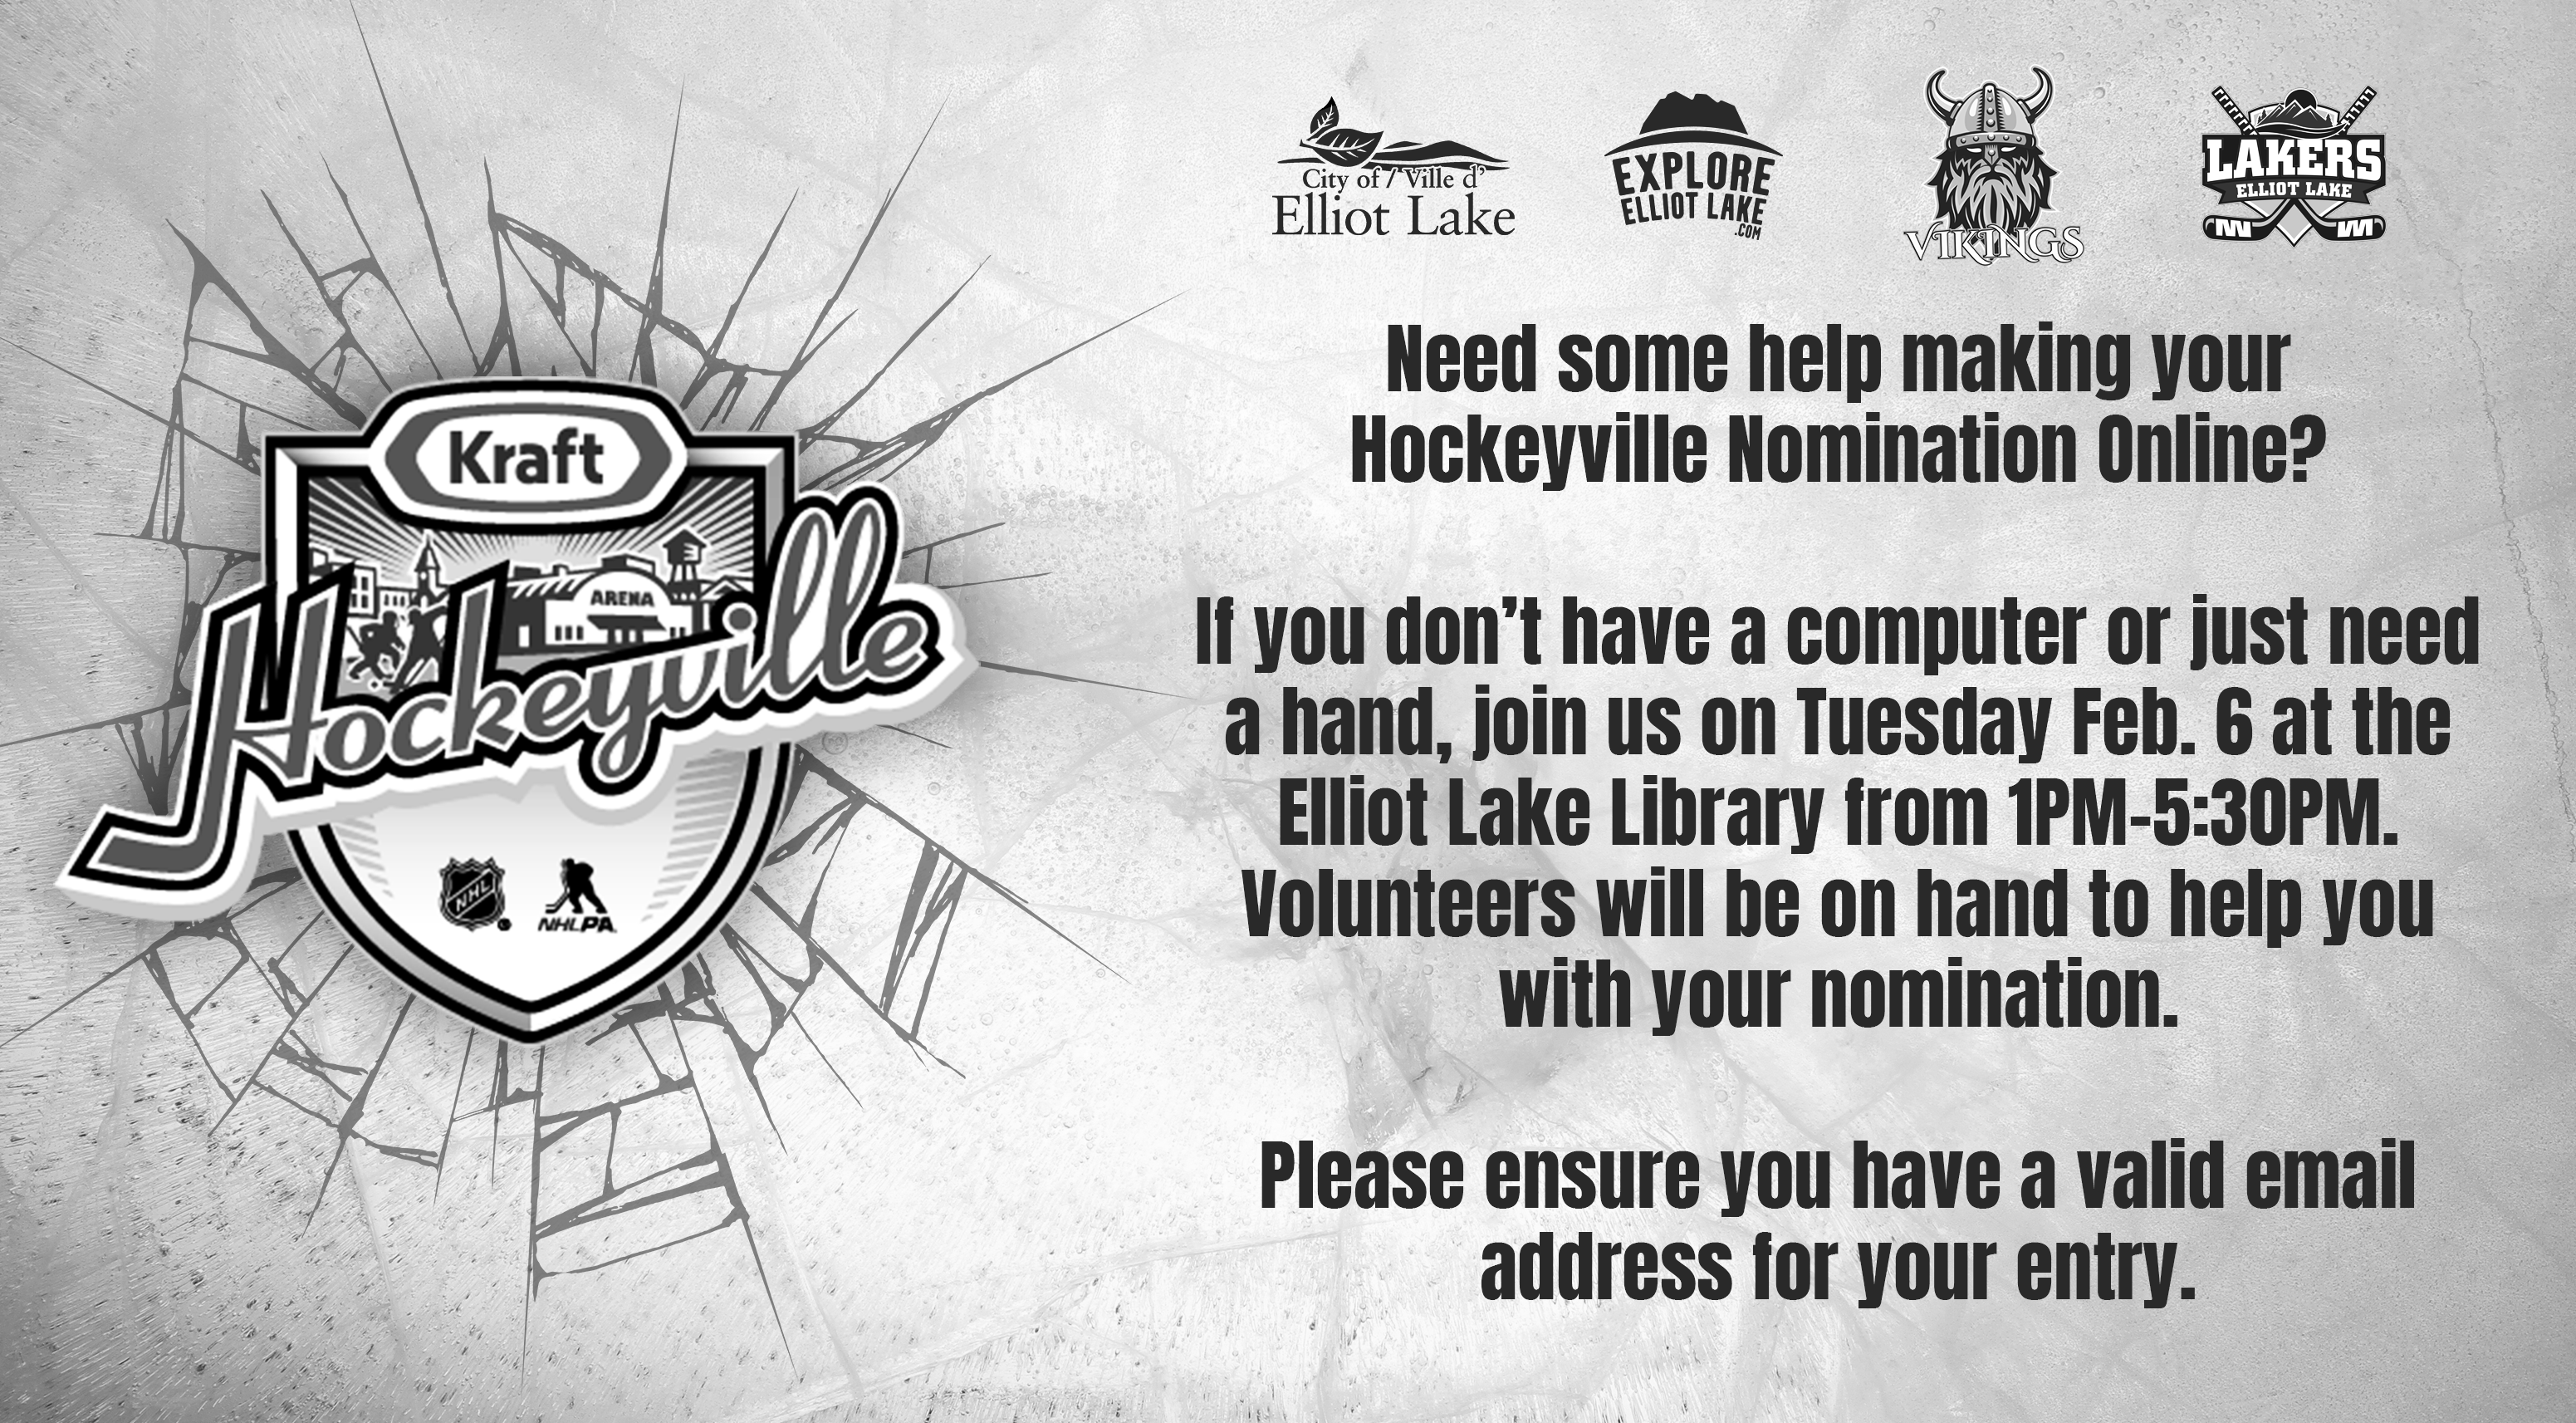 Elliot Lake looking for support to win Kraft Hockeyville contest